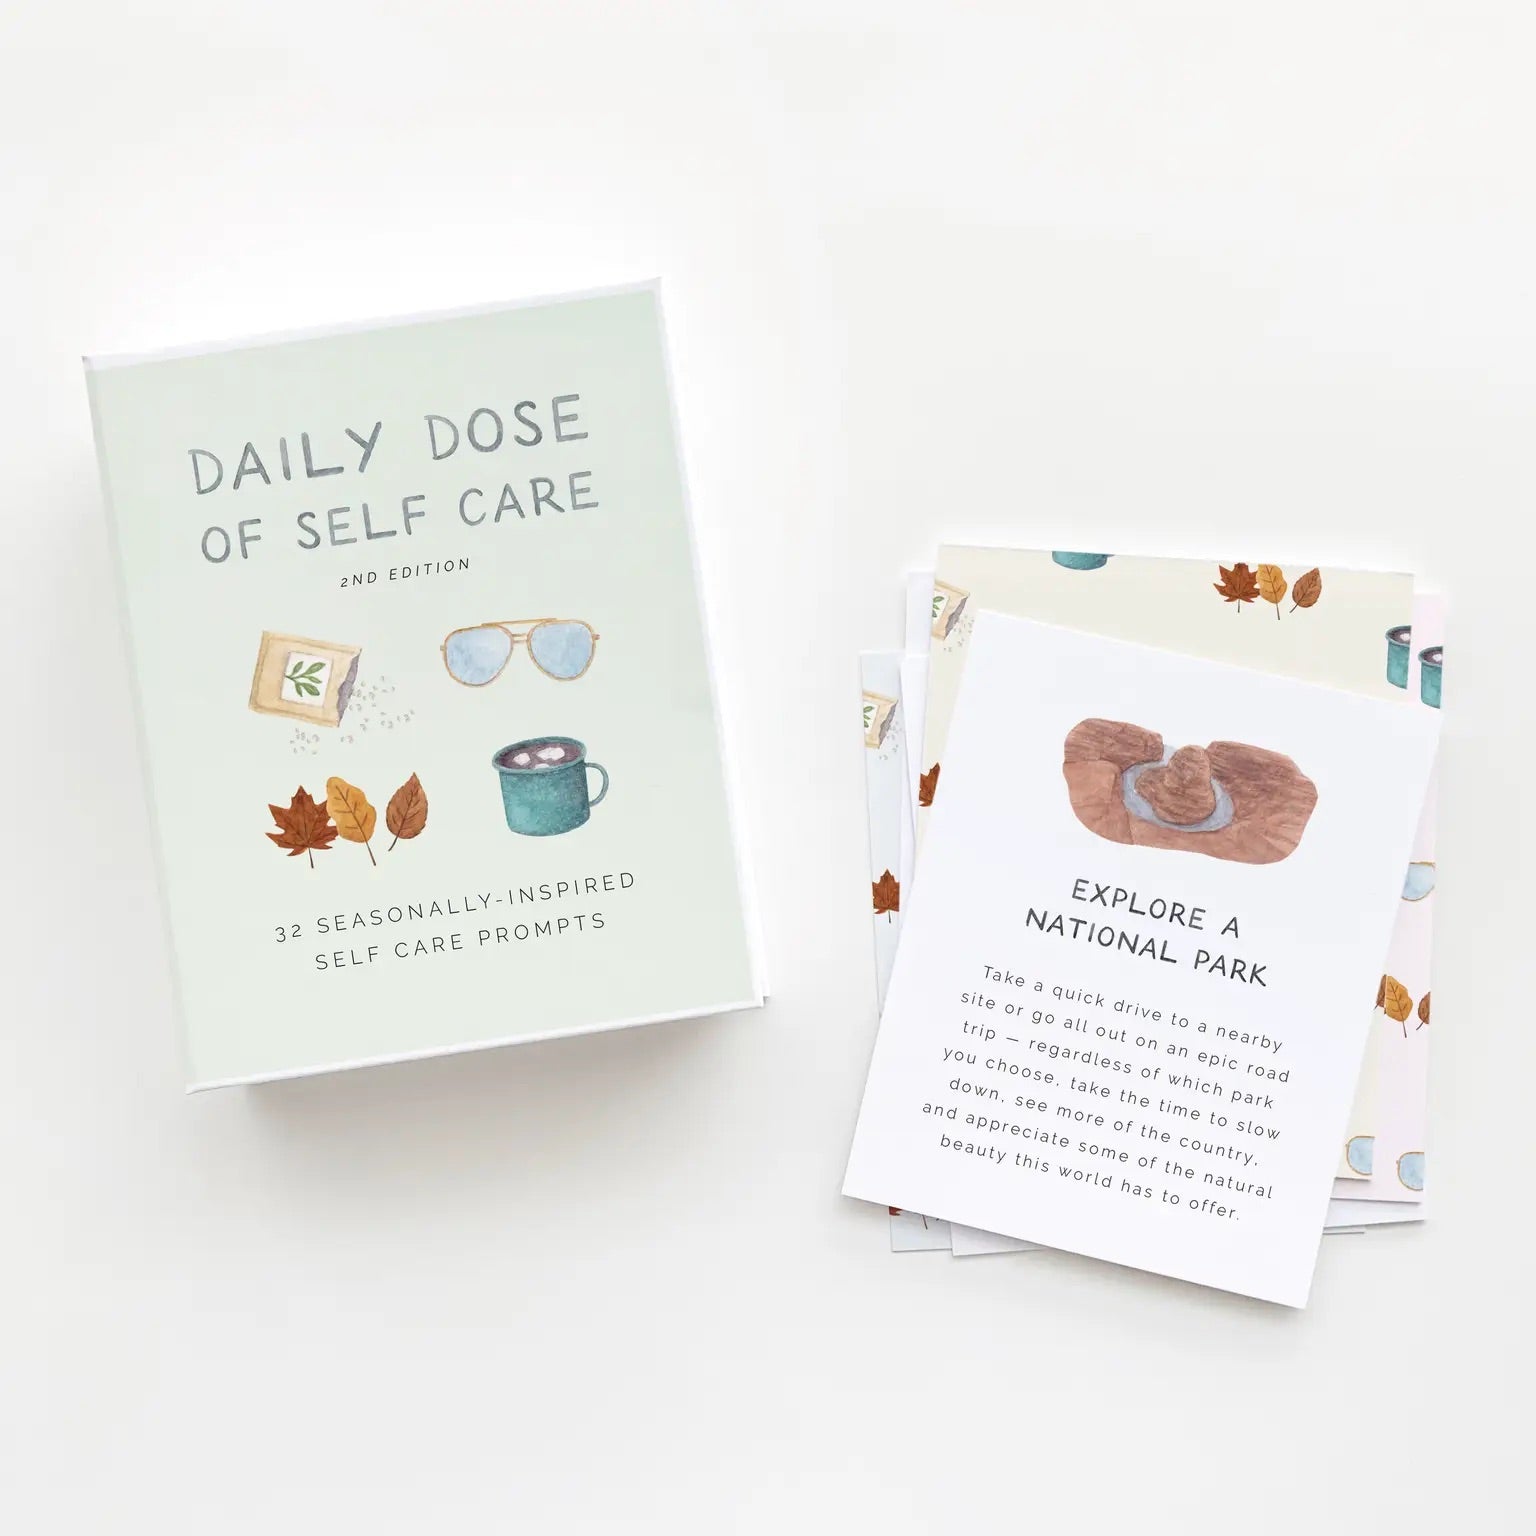 White box with black text reading "daily doses of self care." Box has drawings of leaves, seeds, sunglasses, and a mug of hot chocolate. One card is displayed with the prompt to "explore a national park." 